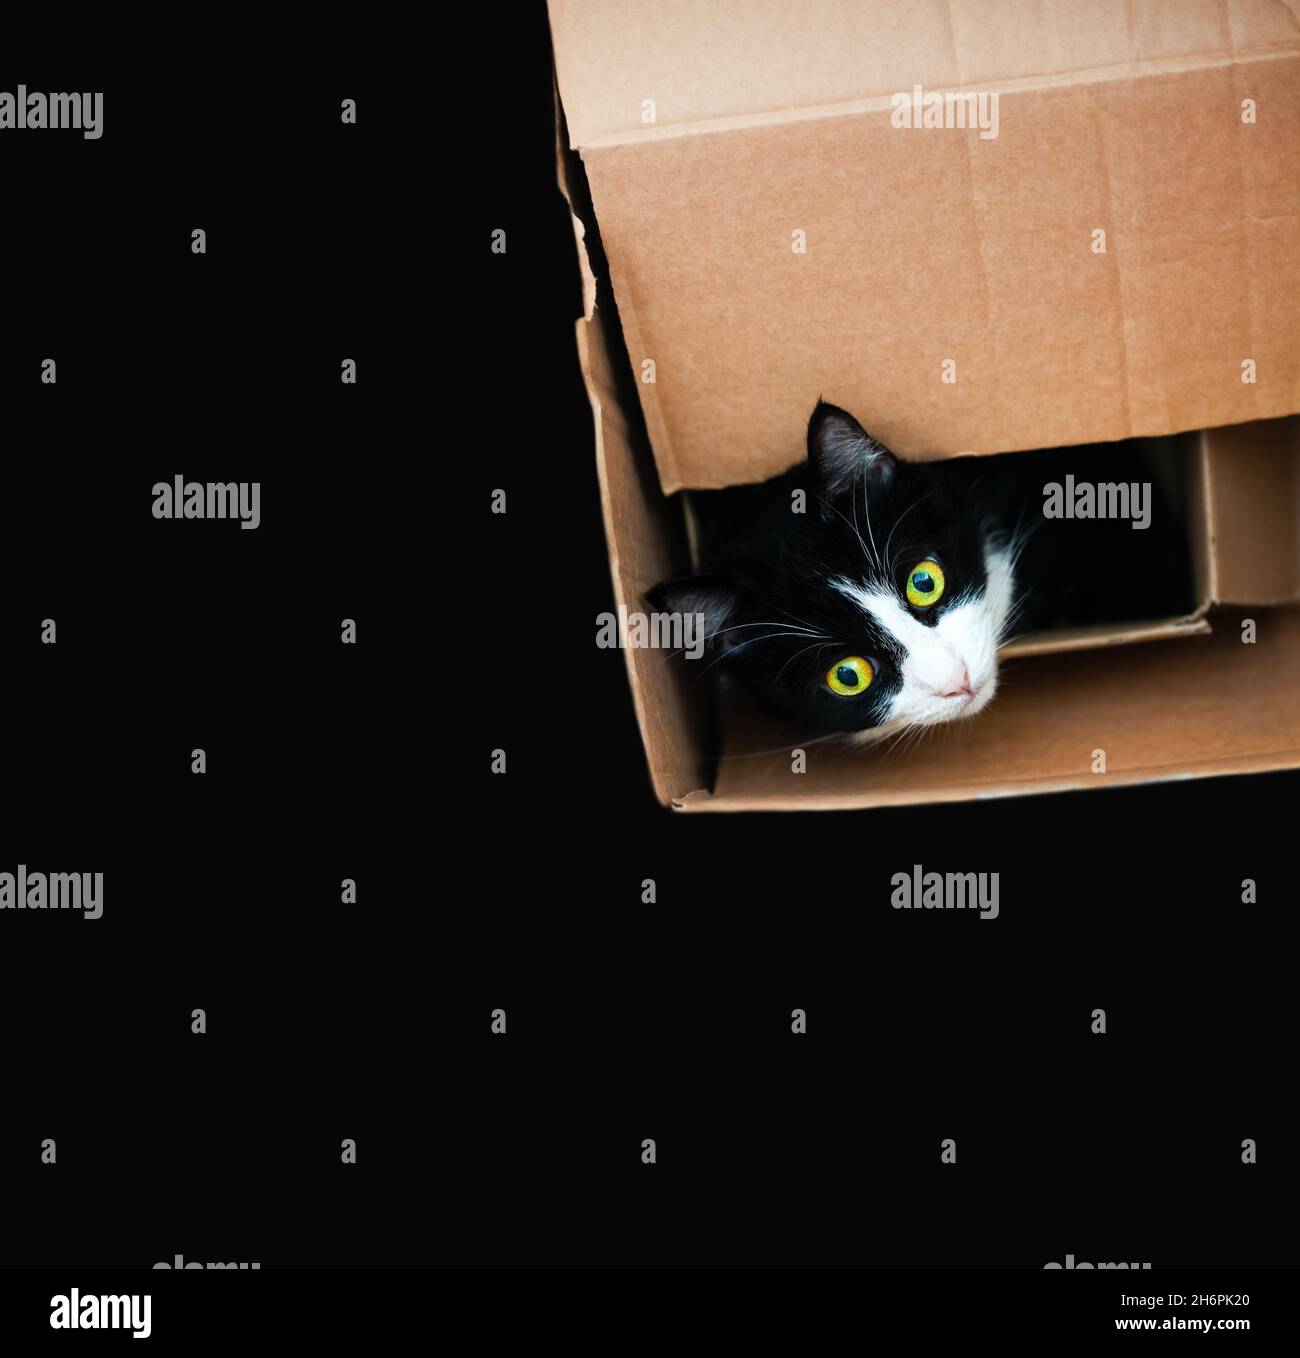 Tuxedo cat in a cardboard box. Intense eyes. Isolated on black background. Space for text. Stock Photo